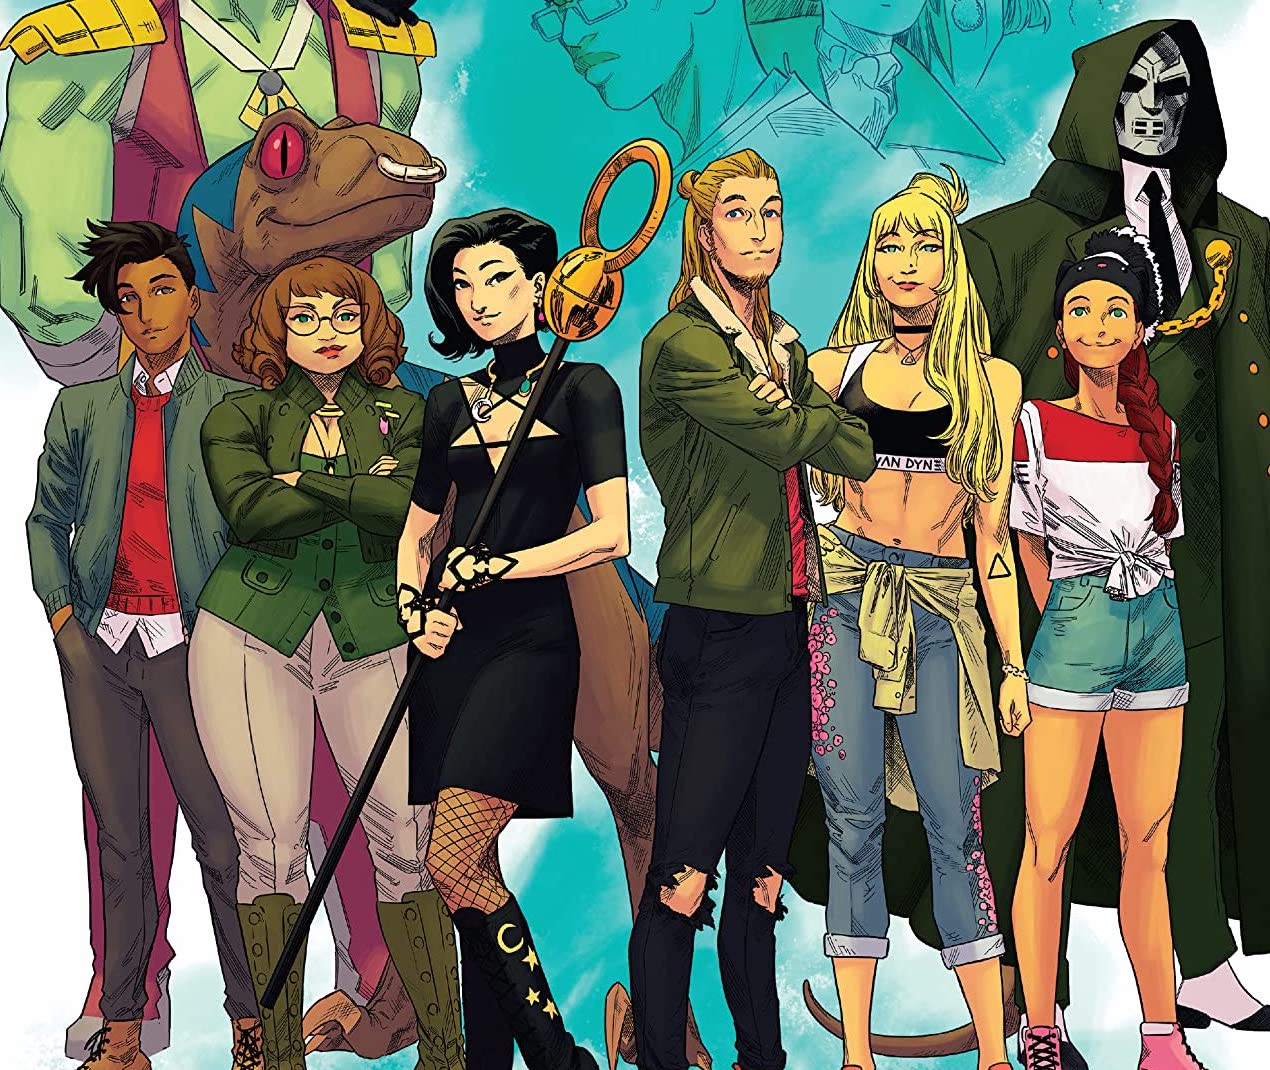 'Runaways' #38 ends on an abrupt but emotional note